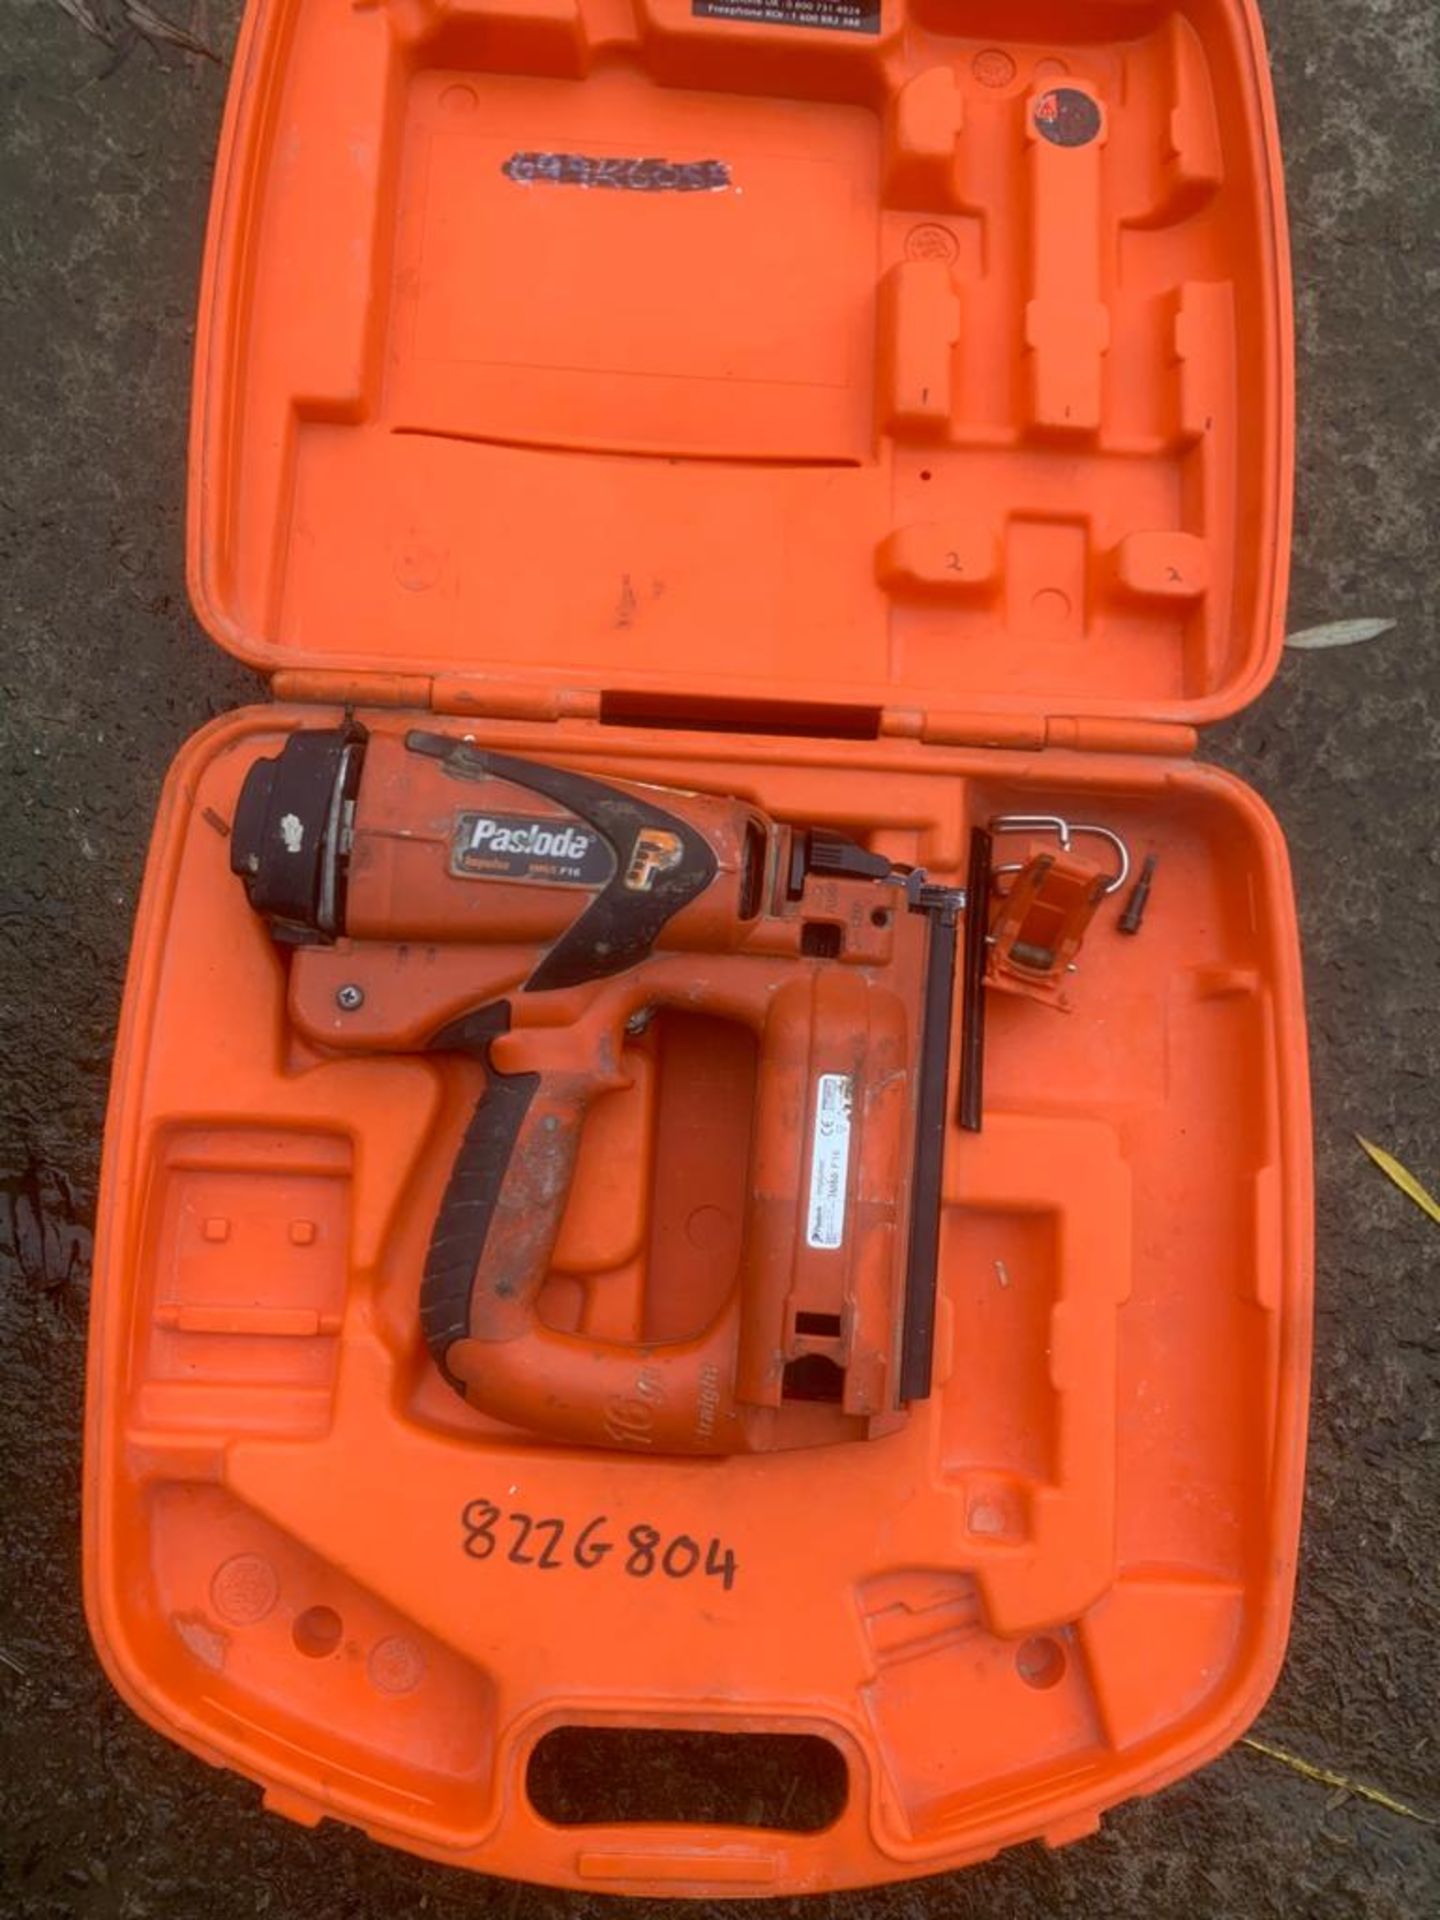 PASLODE IM65F16 SECOND FIX NAIL GUN UNTESTED, UK NATIONWIDE DELIVERY £10 *PLUS VAT*